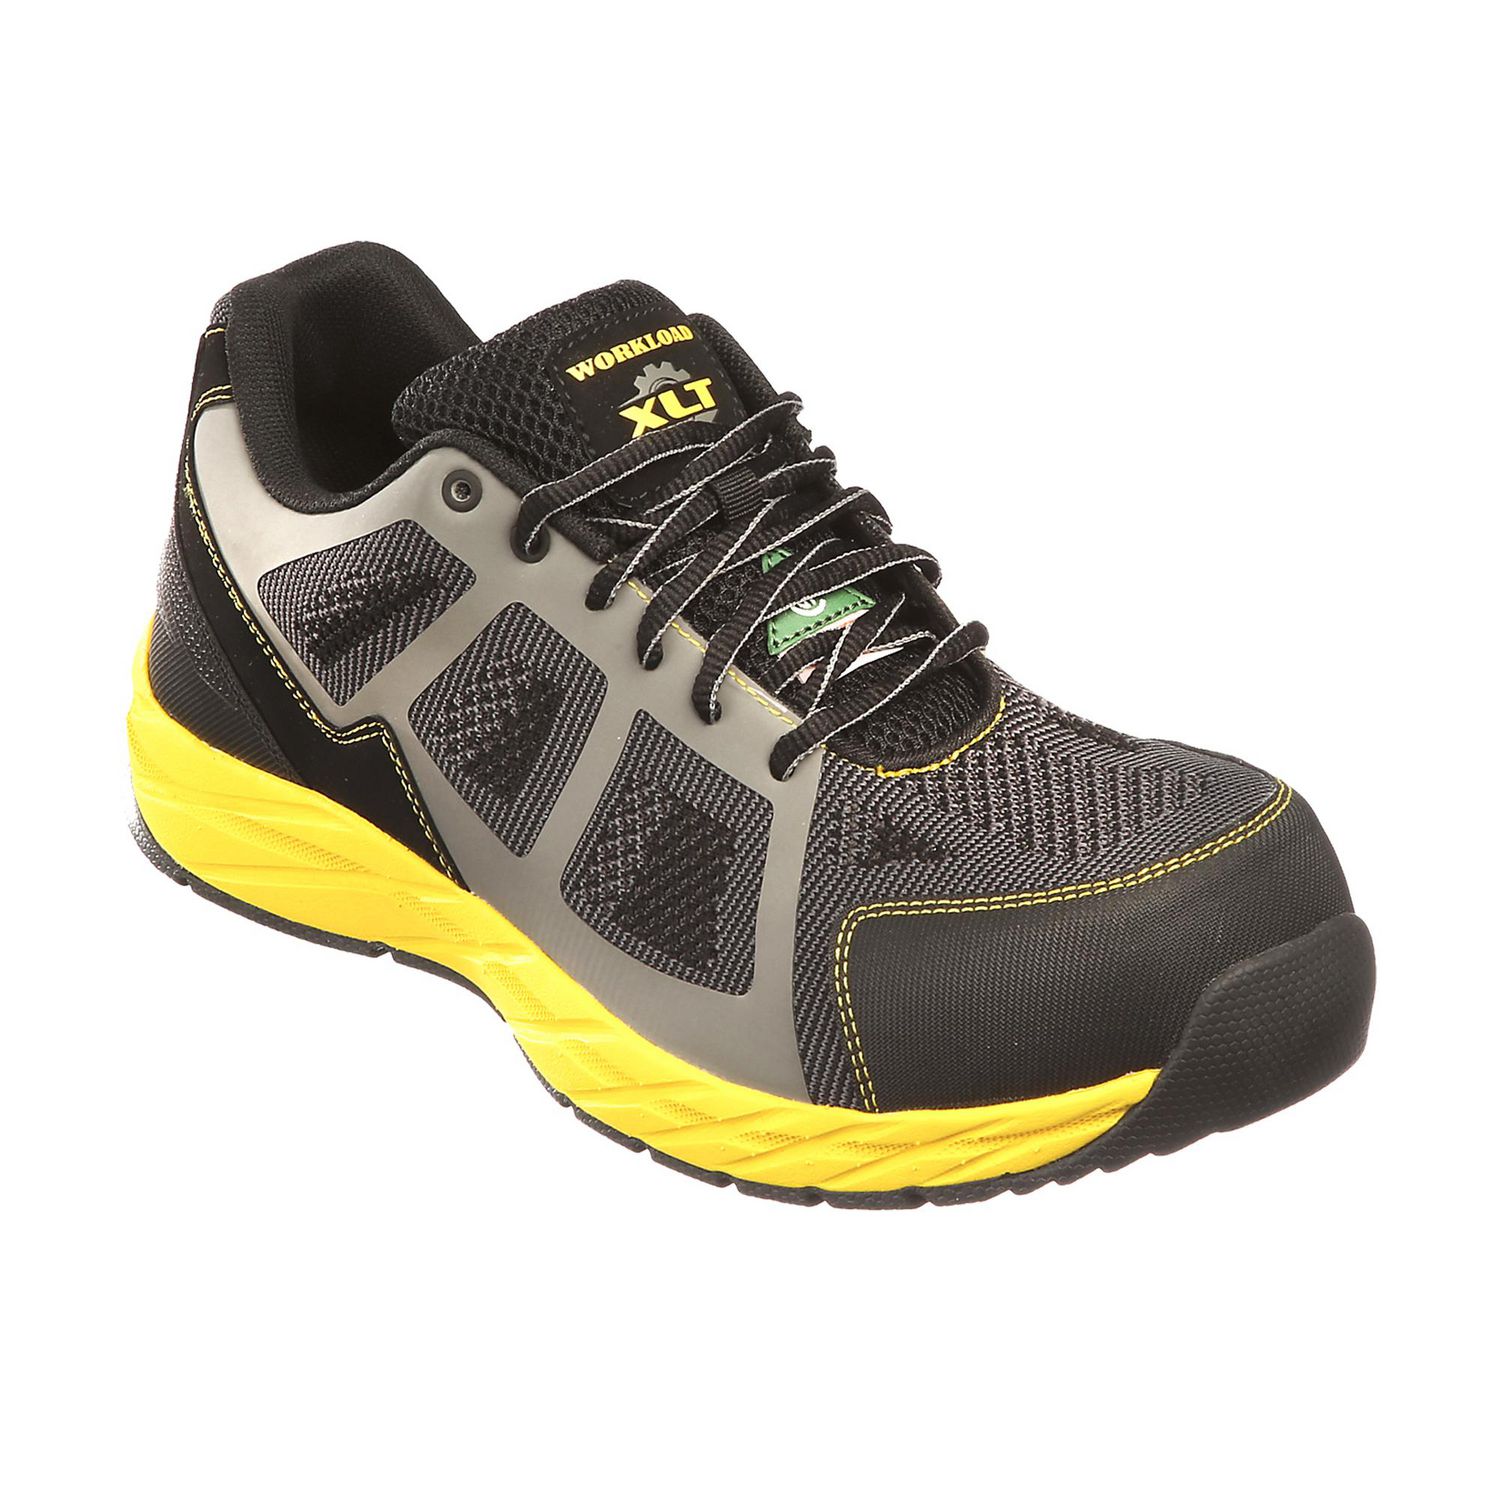 men's athletic safety shoes